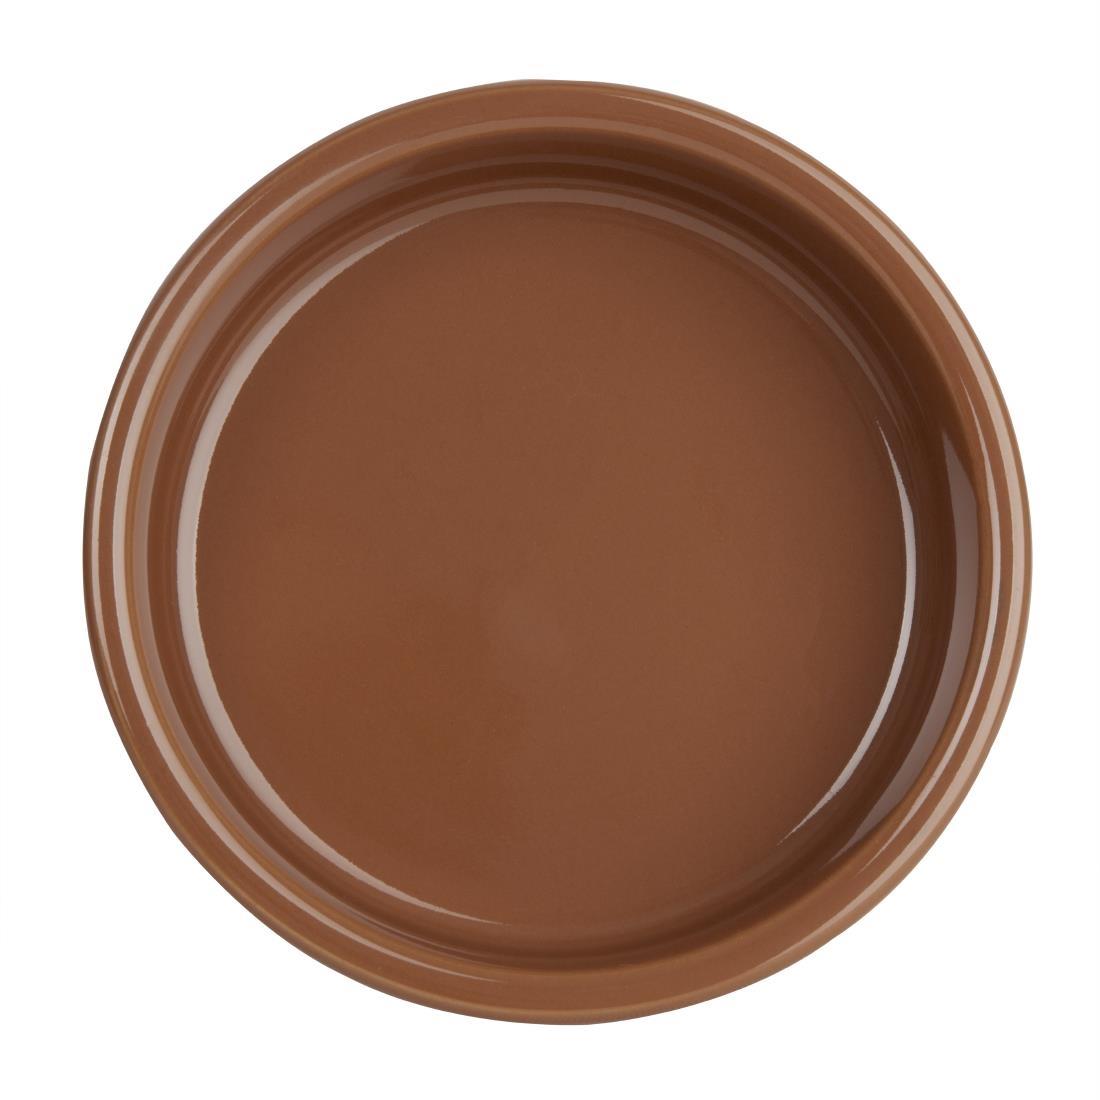 Olympia Terracotta Mediterranean Dishes (Pack of 6) - CD740  - 3